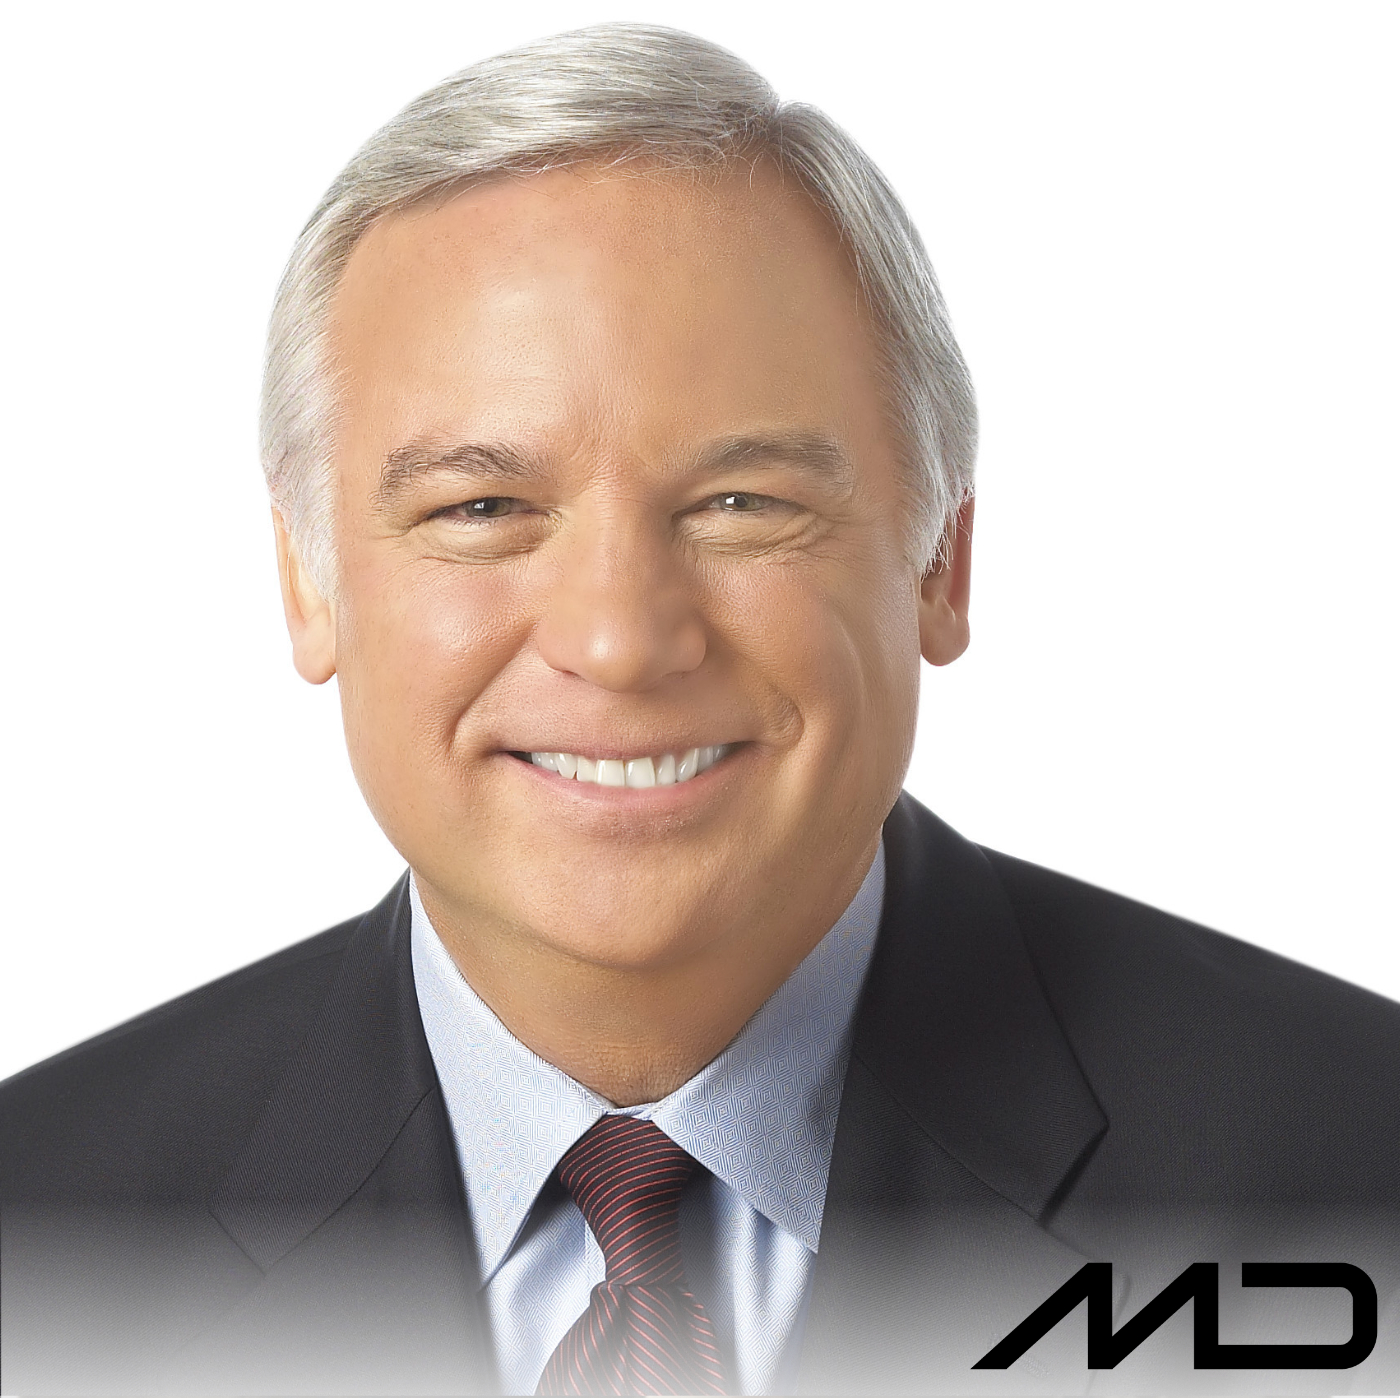 How To Build The Biggest Personal Brand In Your Industry… with Jack Canfield